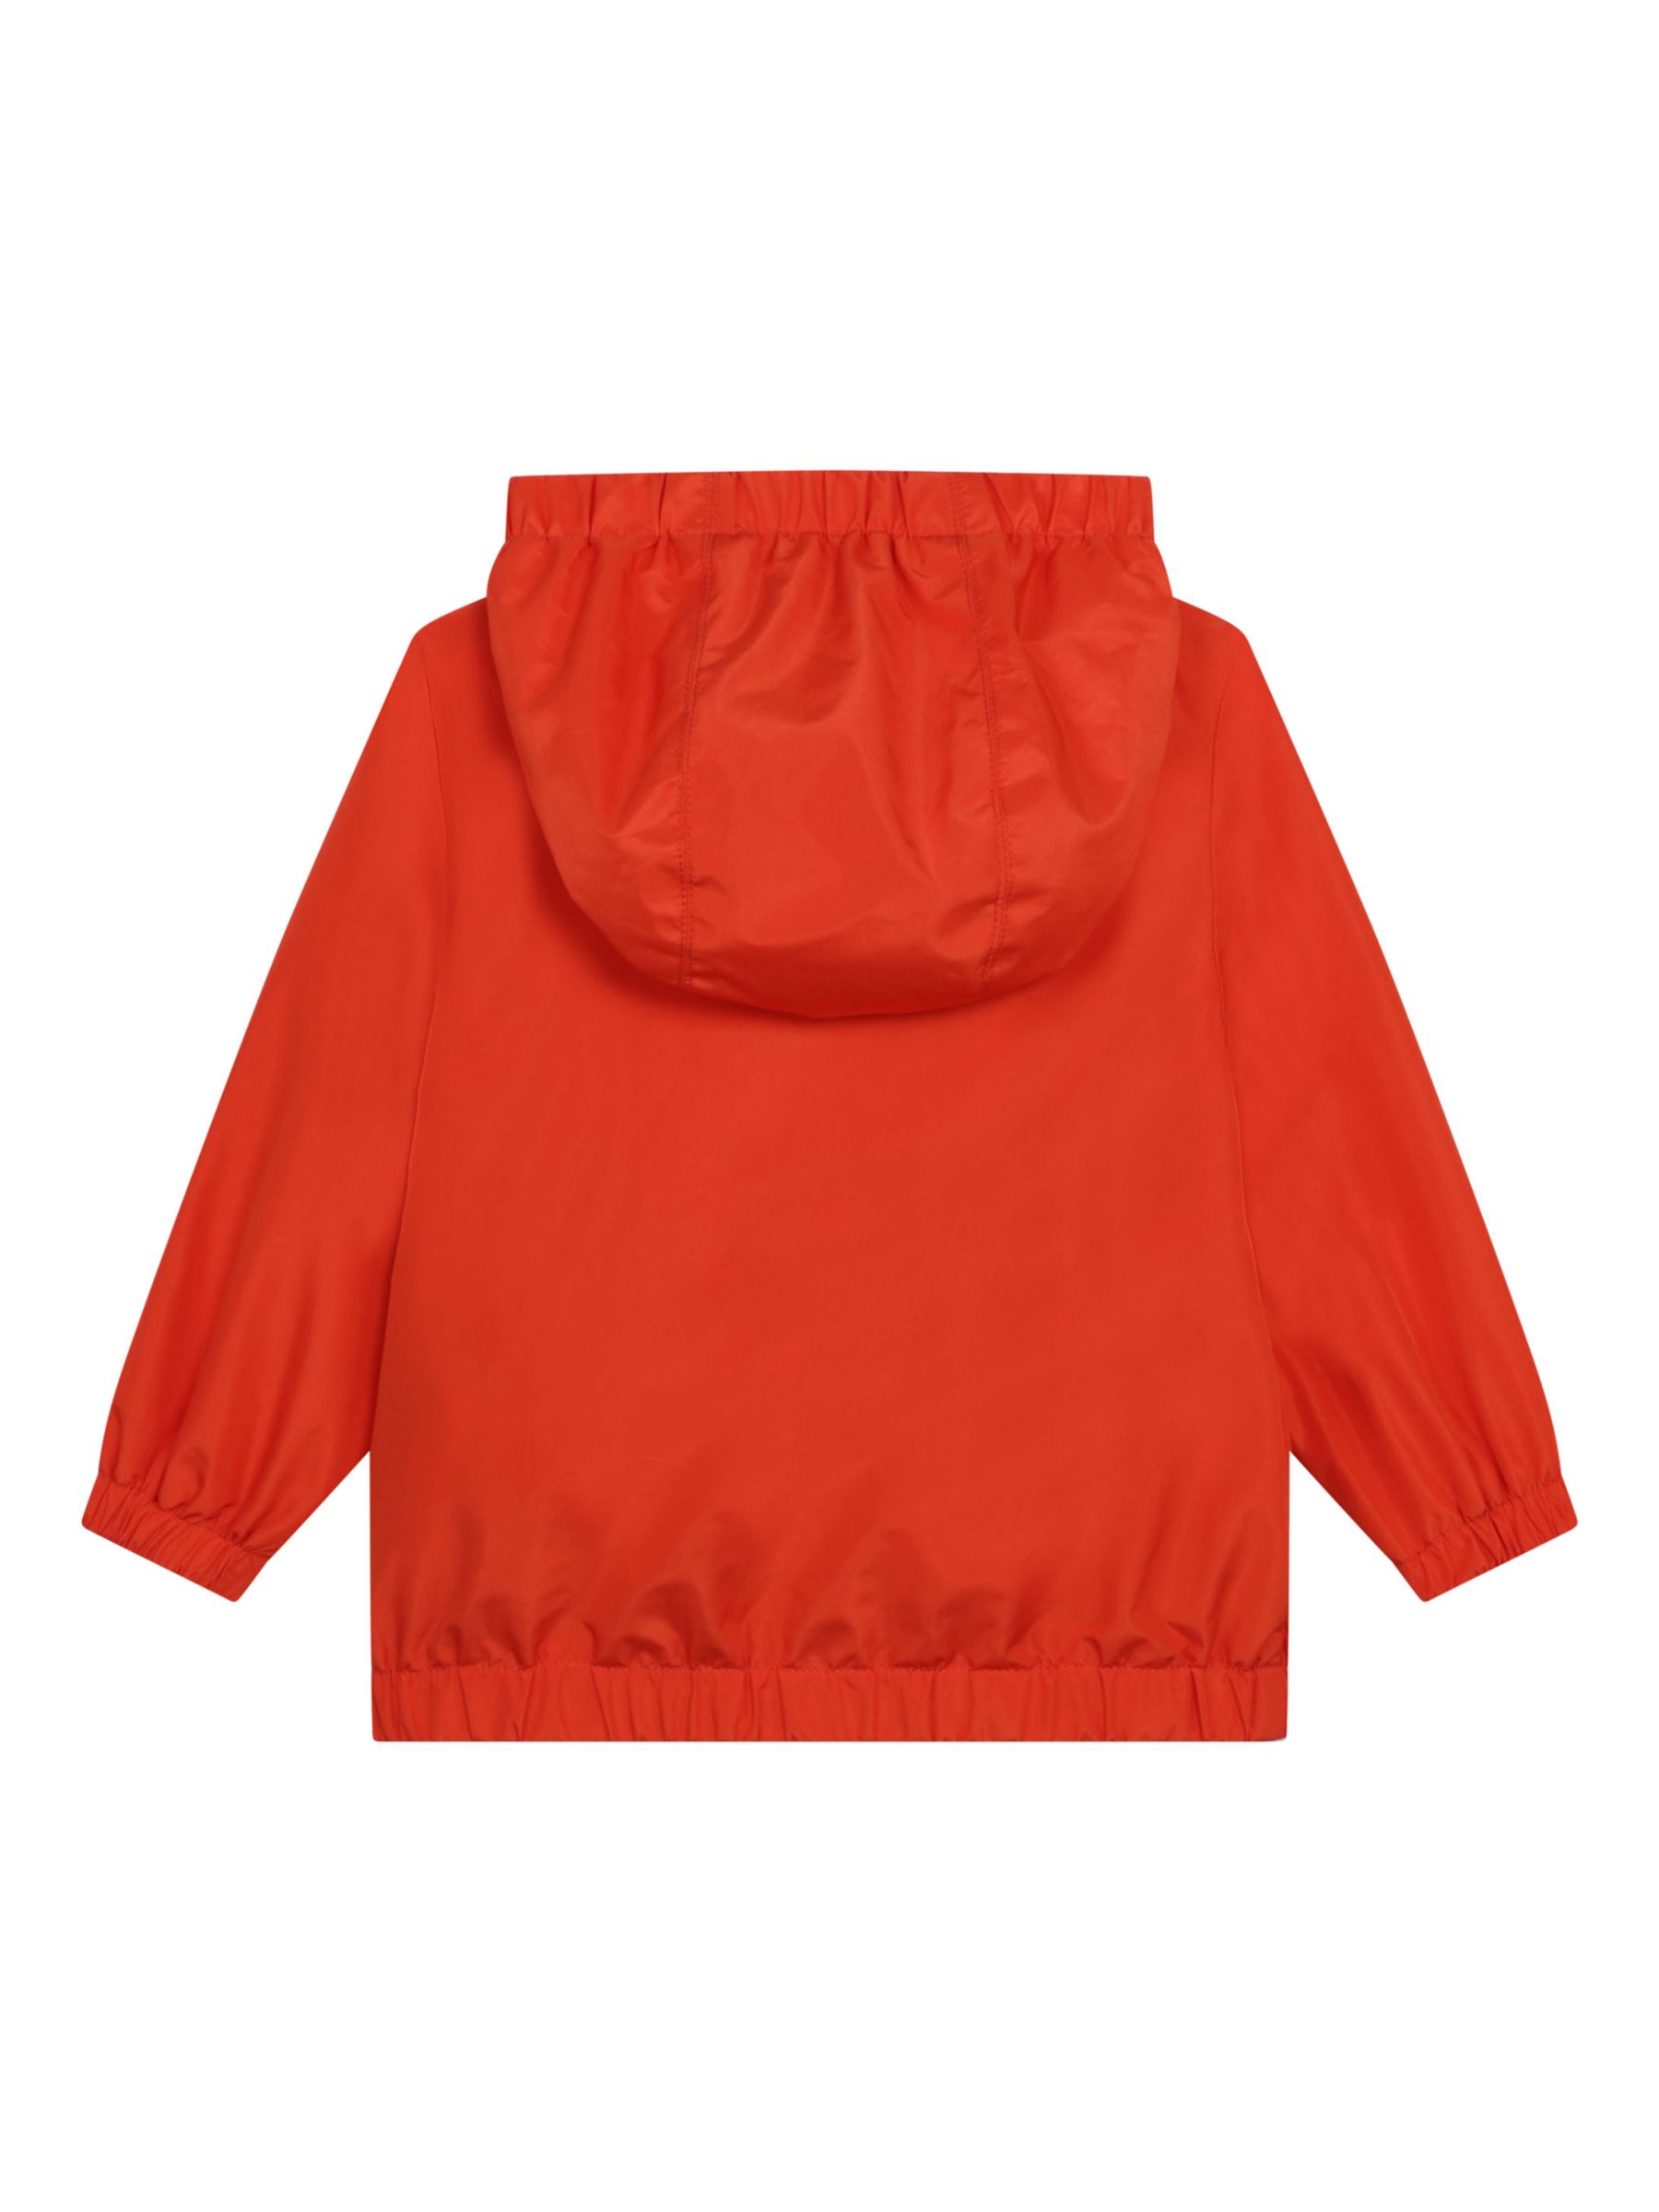 Buy Timberland Baby Hooded Zipped Windbreaker Jacket, Red Online at johnlewis.com